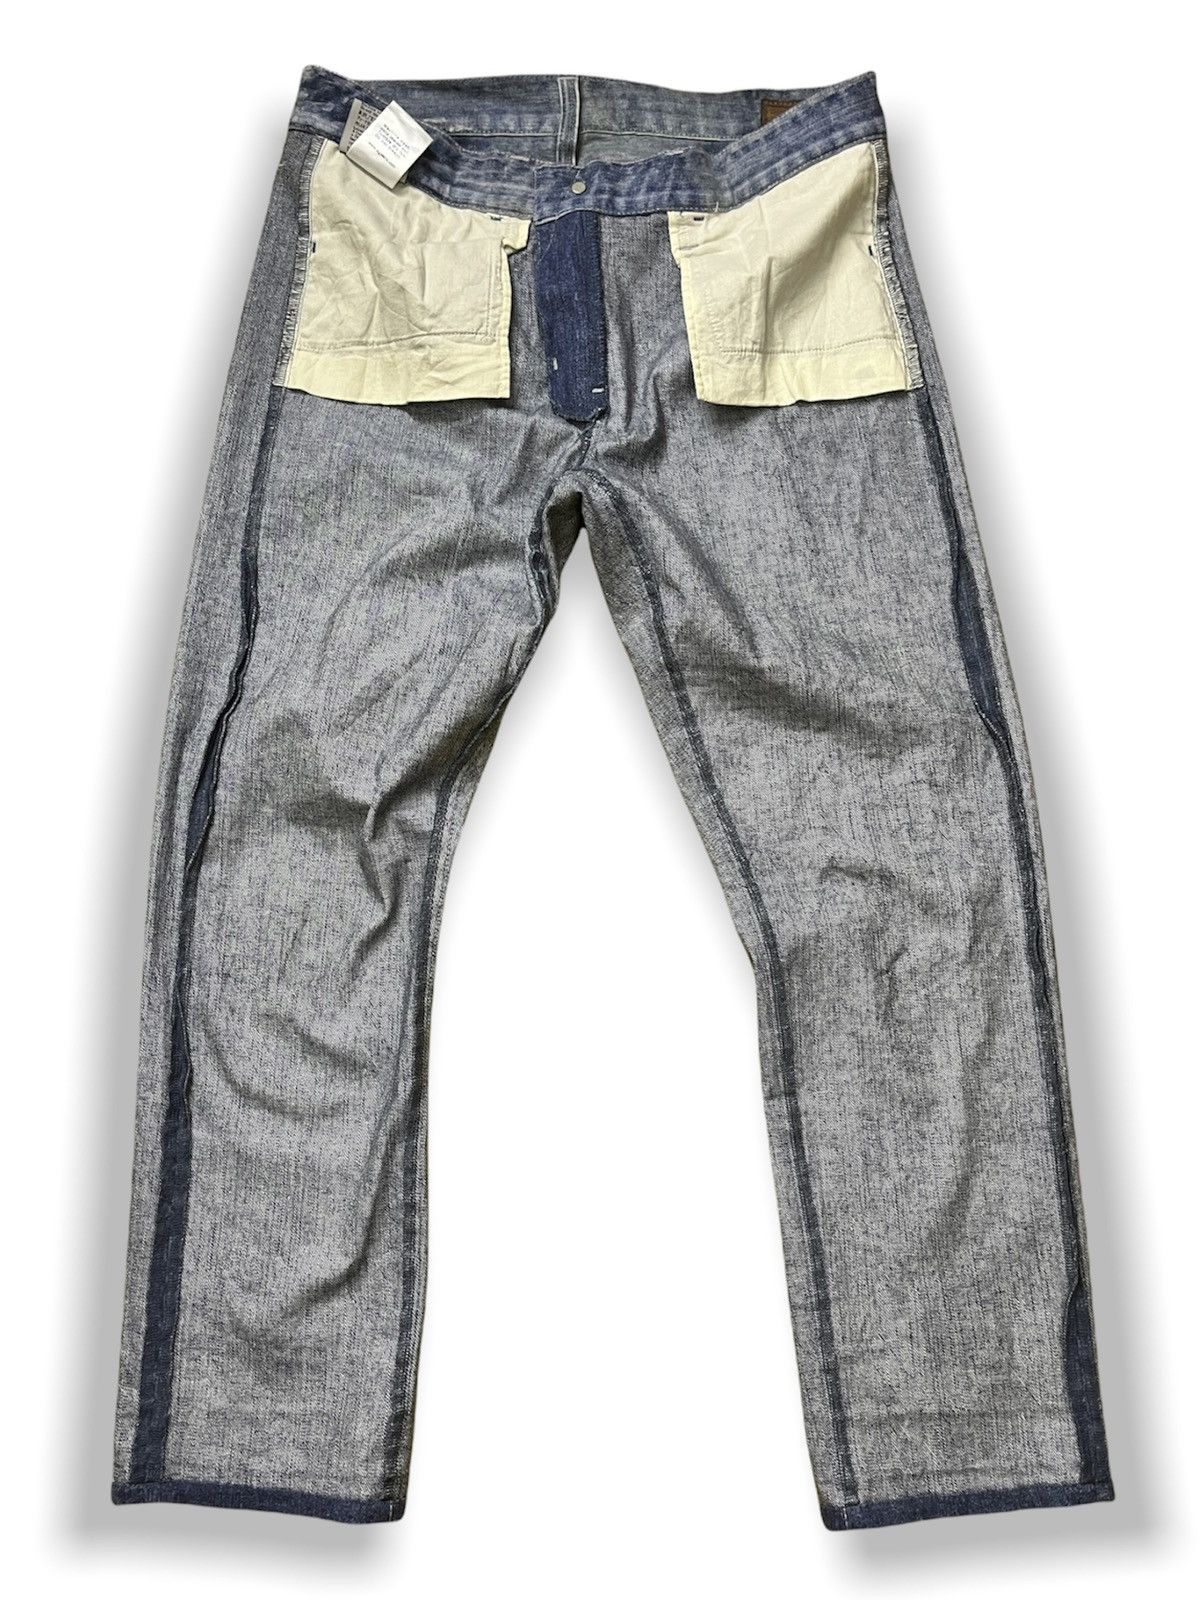 DISTRESSED PRINTED AG ADRIANO GOLDSCHMIED DENIM PANTS - 13